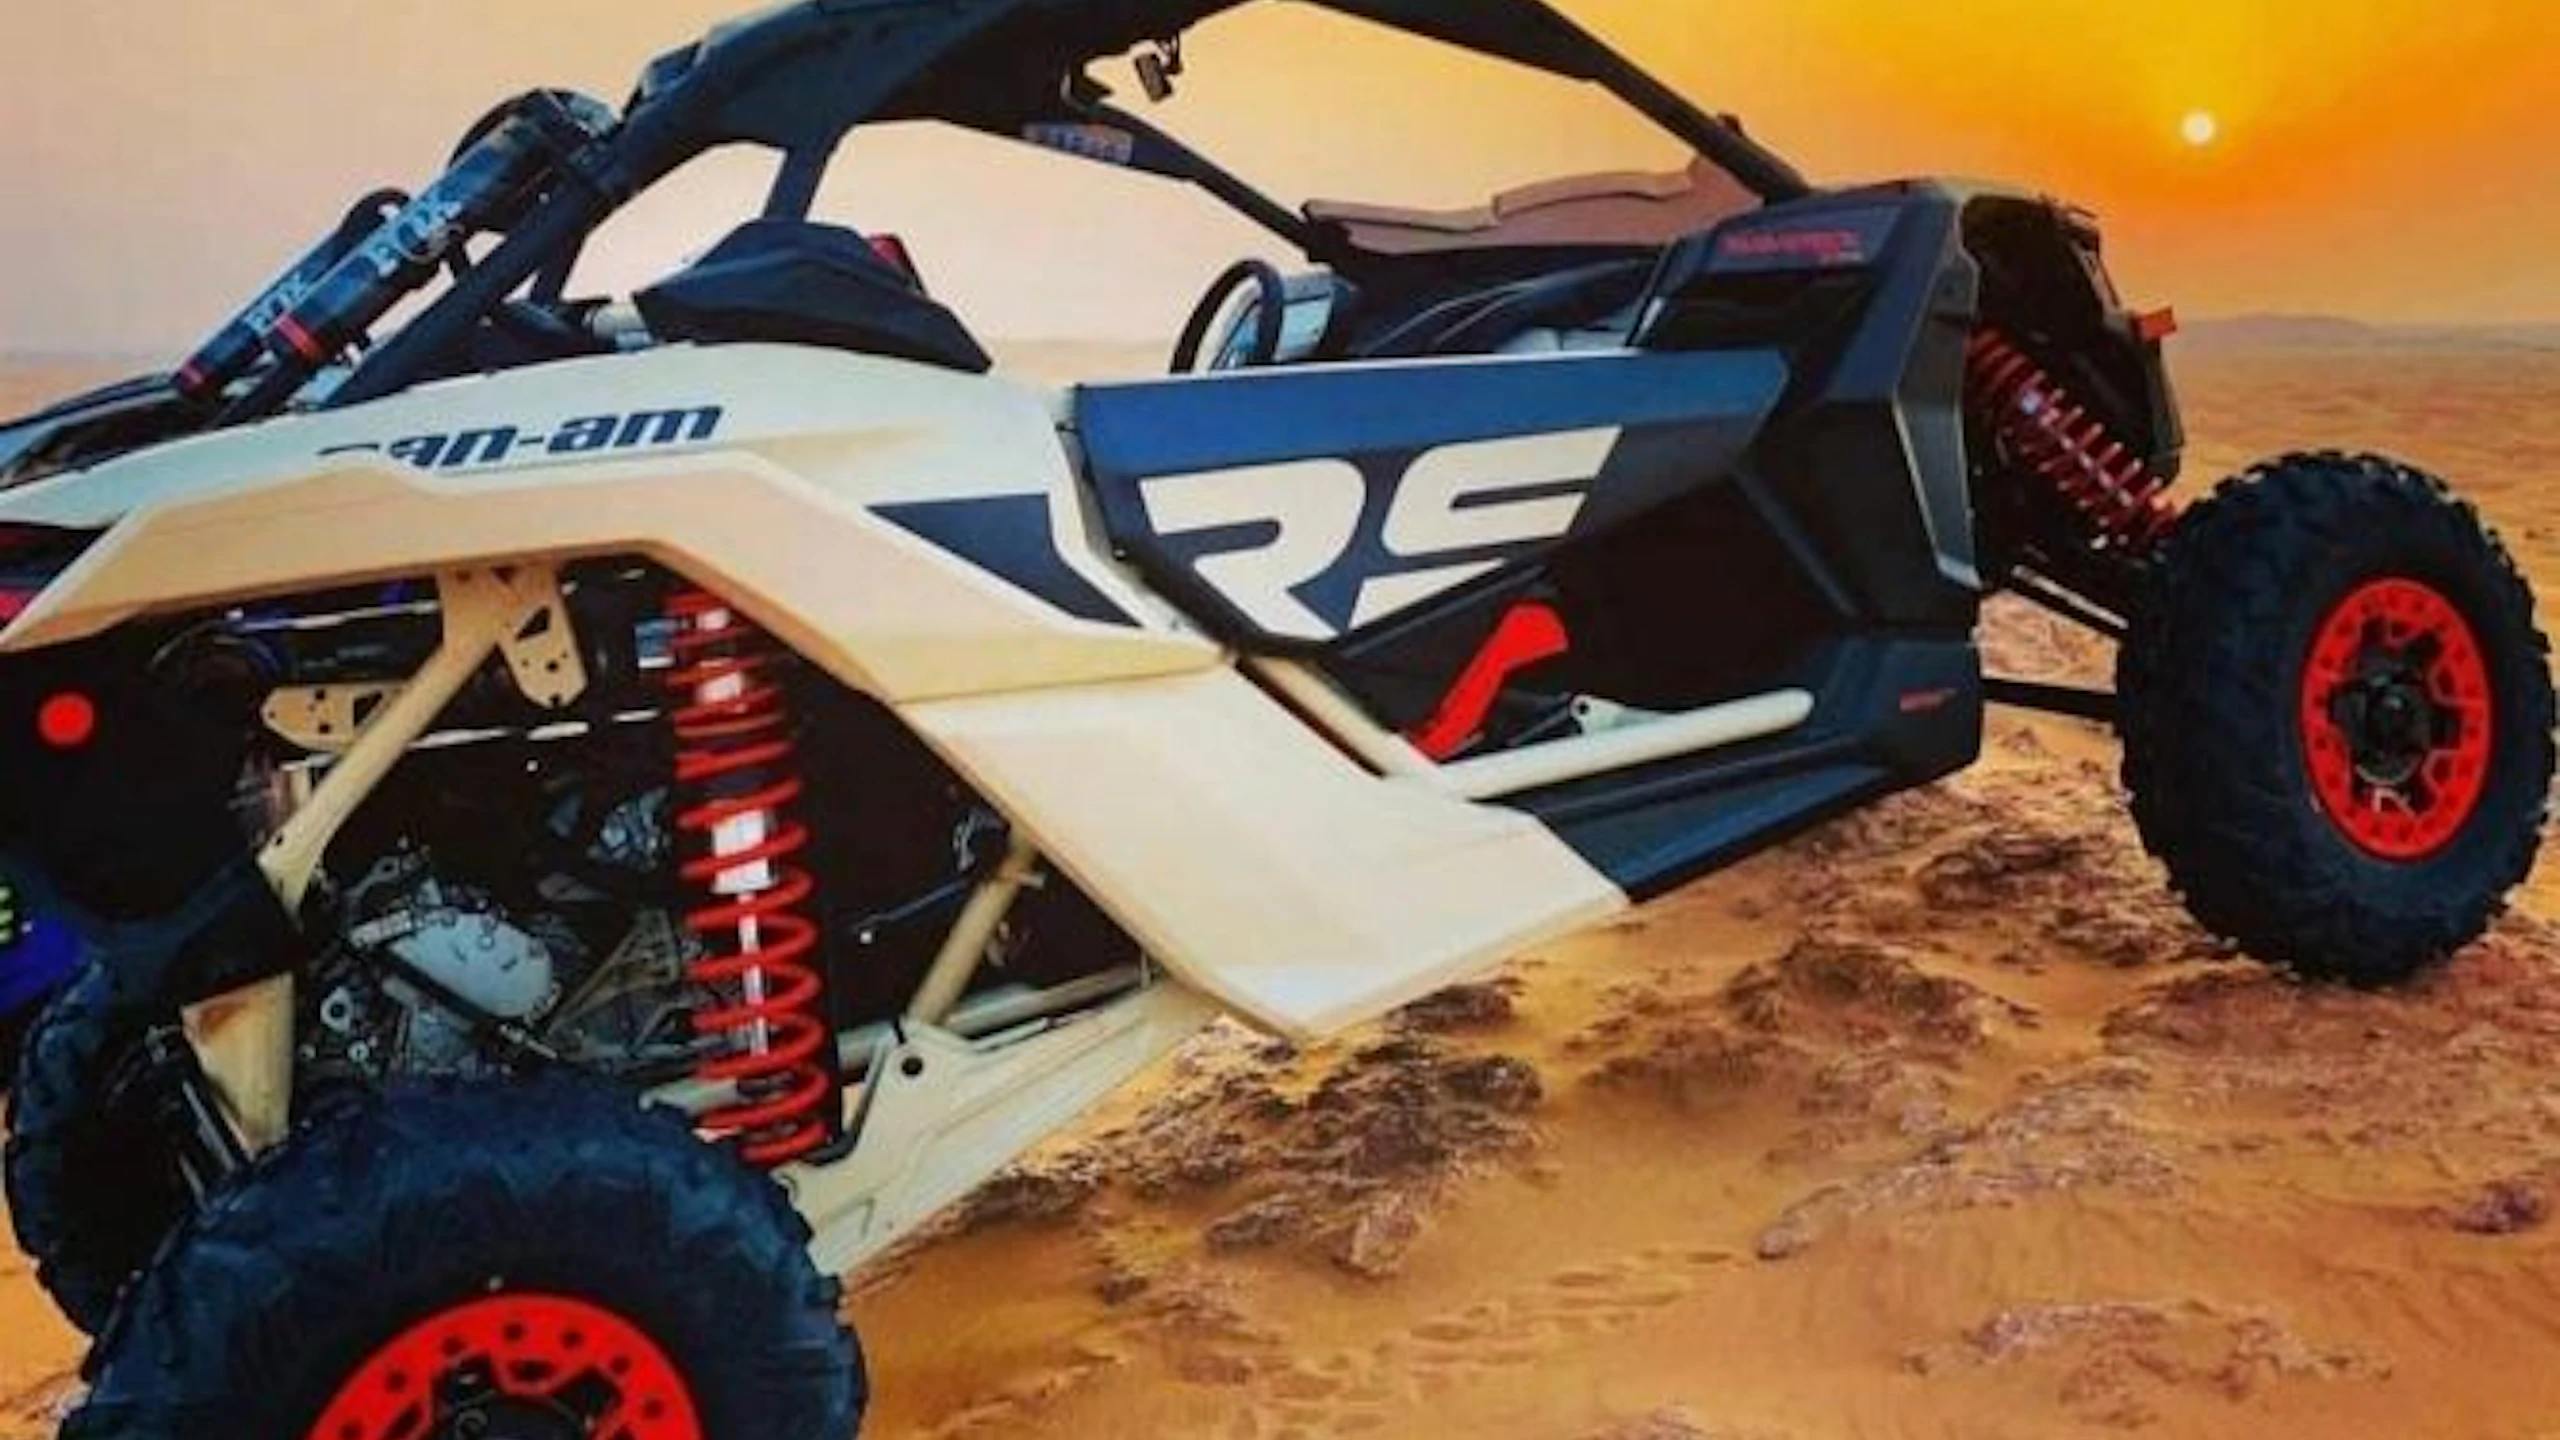 Can-Am 1000 CC Open Desert Experience: Self Drive - Two Seater Discount